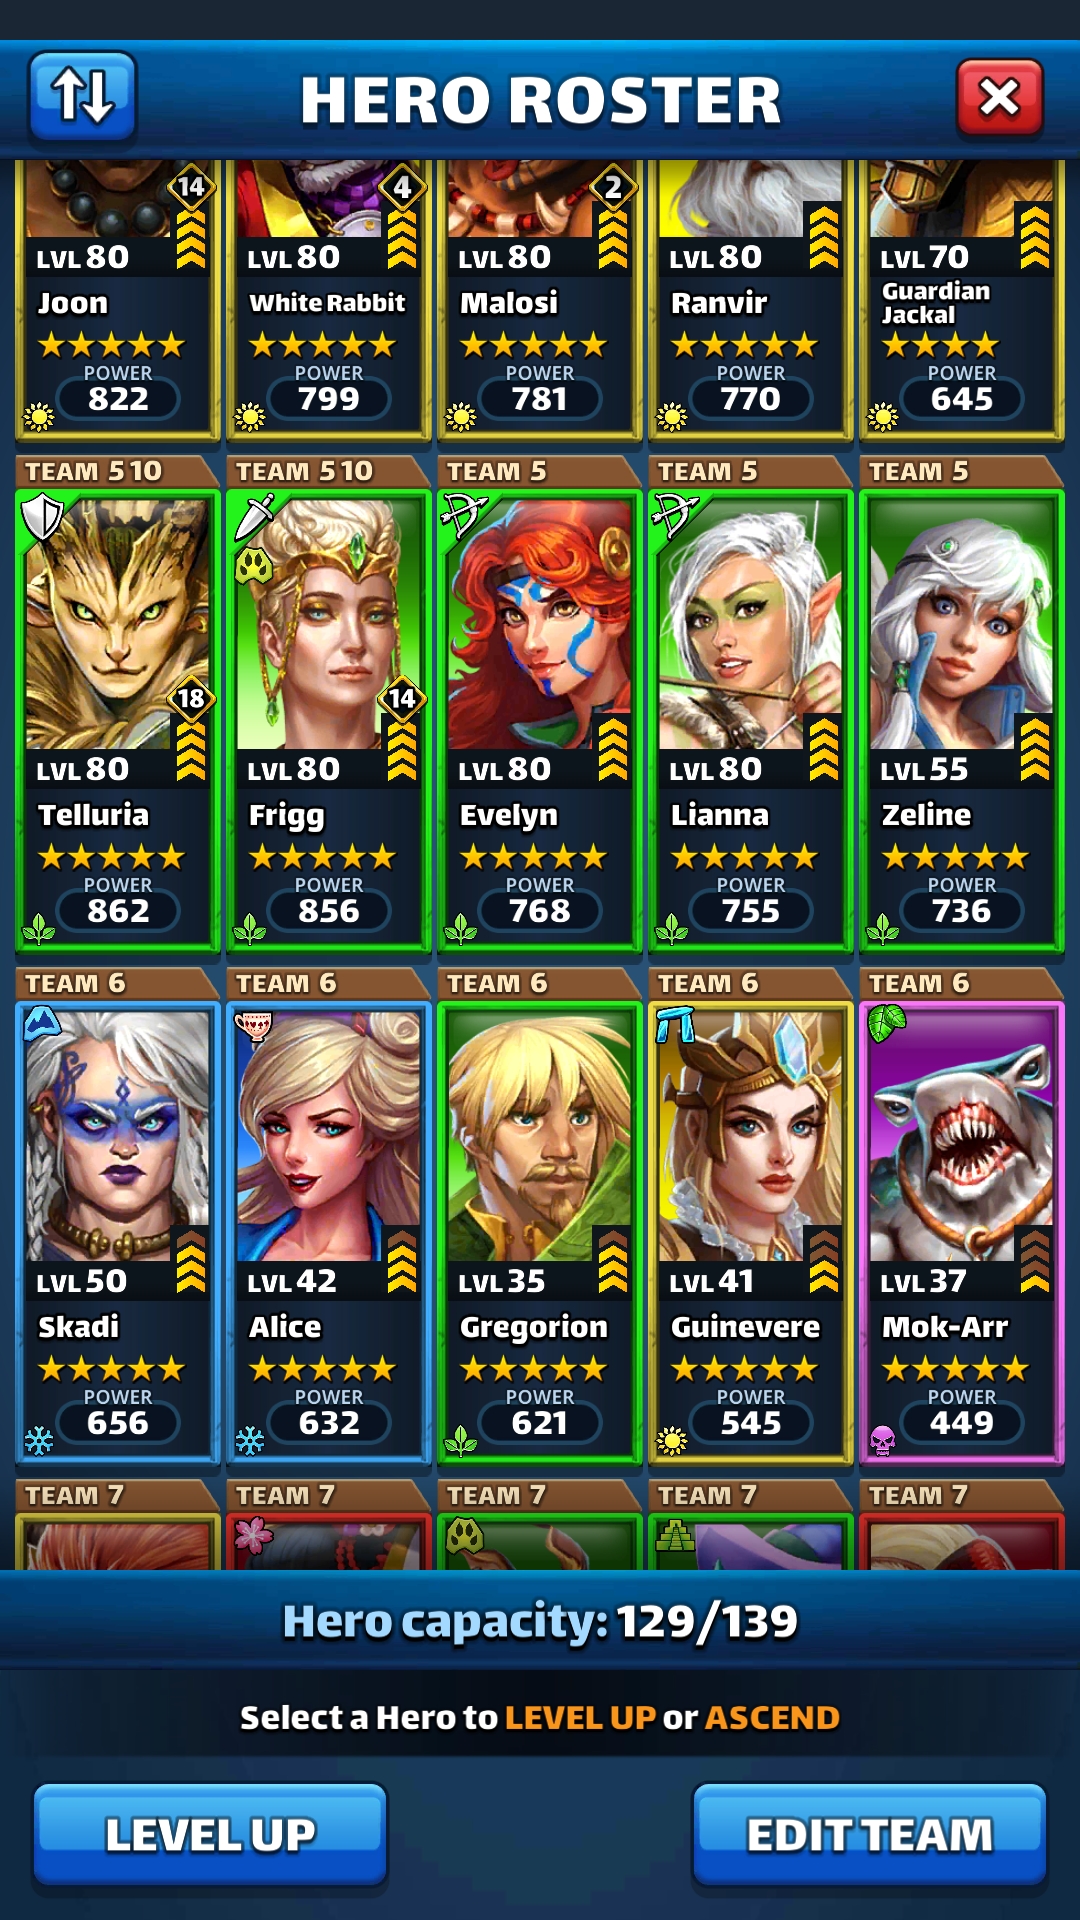 Selling Vip Account Level 62 Max 4542 Team Power - 69 5s And Much More Epicnpc Marketplace